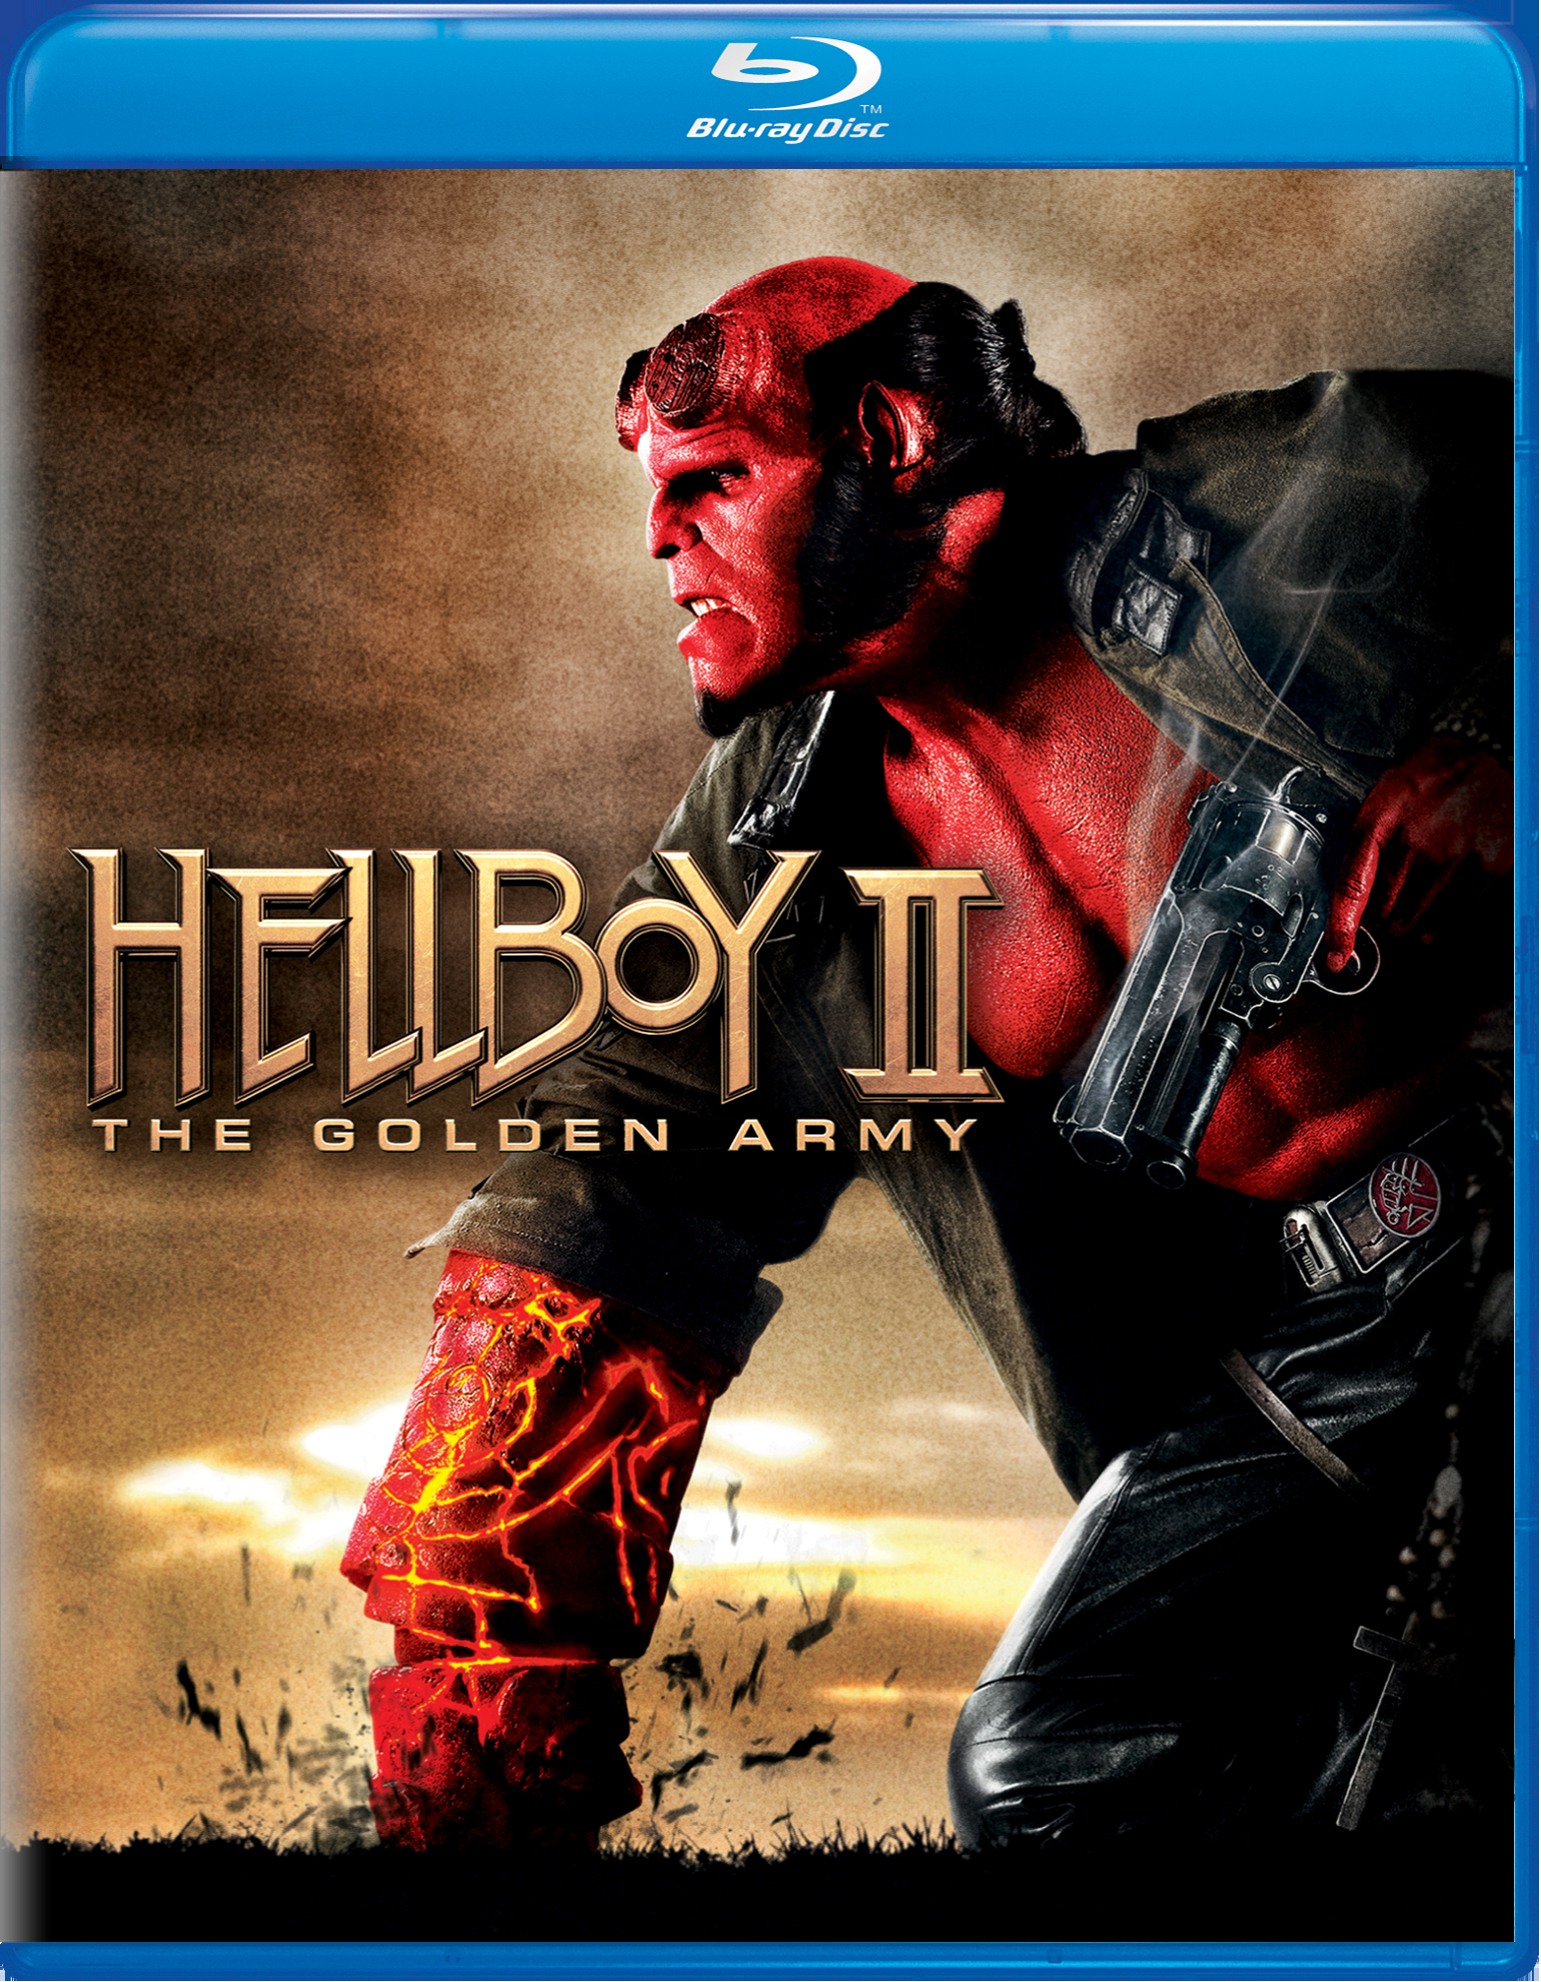 Hellboy 2 - The Golden Army - Blu-ray [ 2008 ]  - Action Movies On Blu-ray - Movies On GRUV